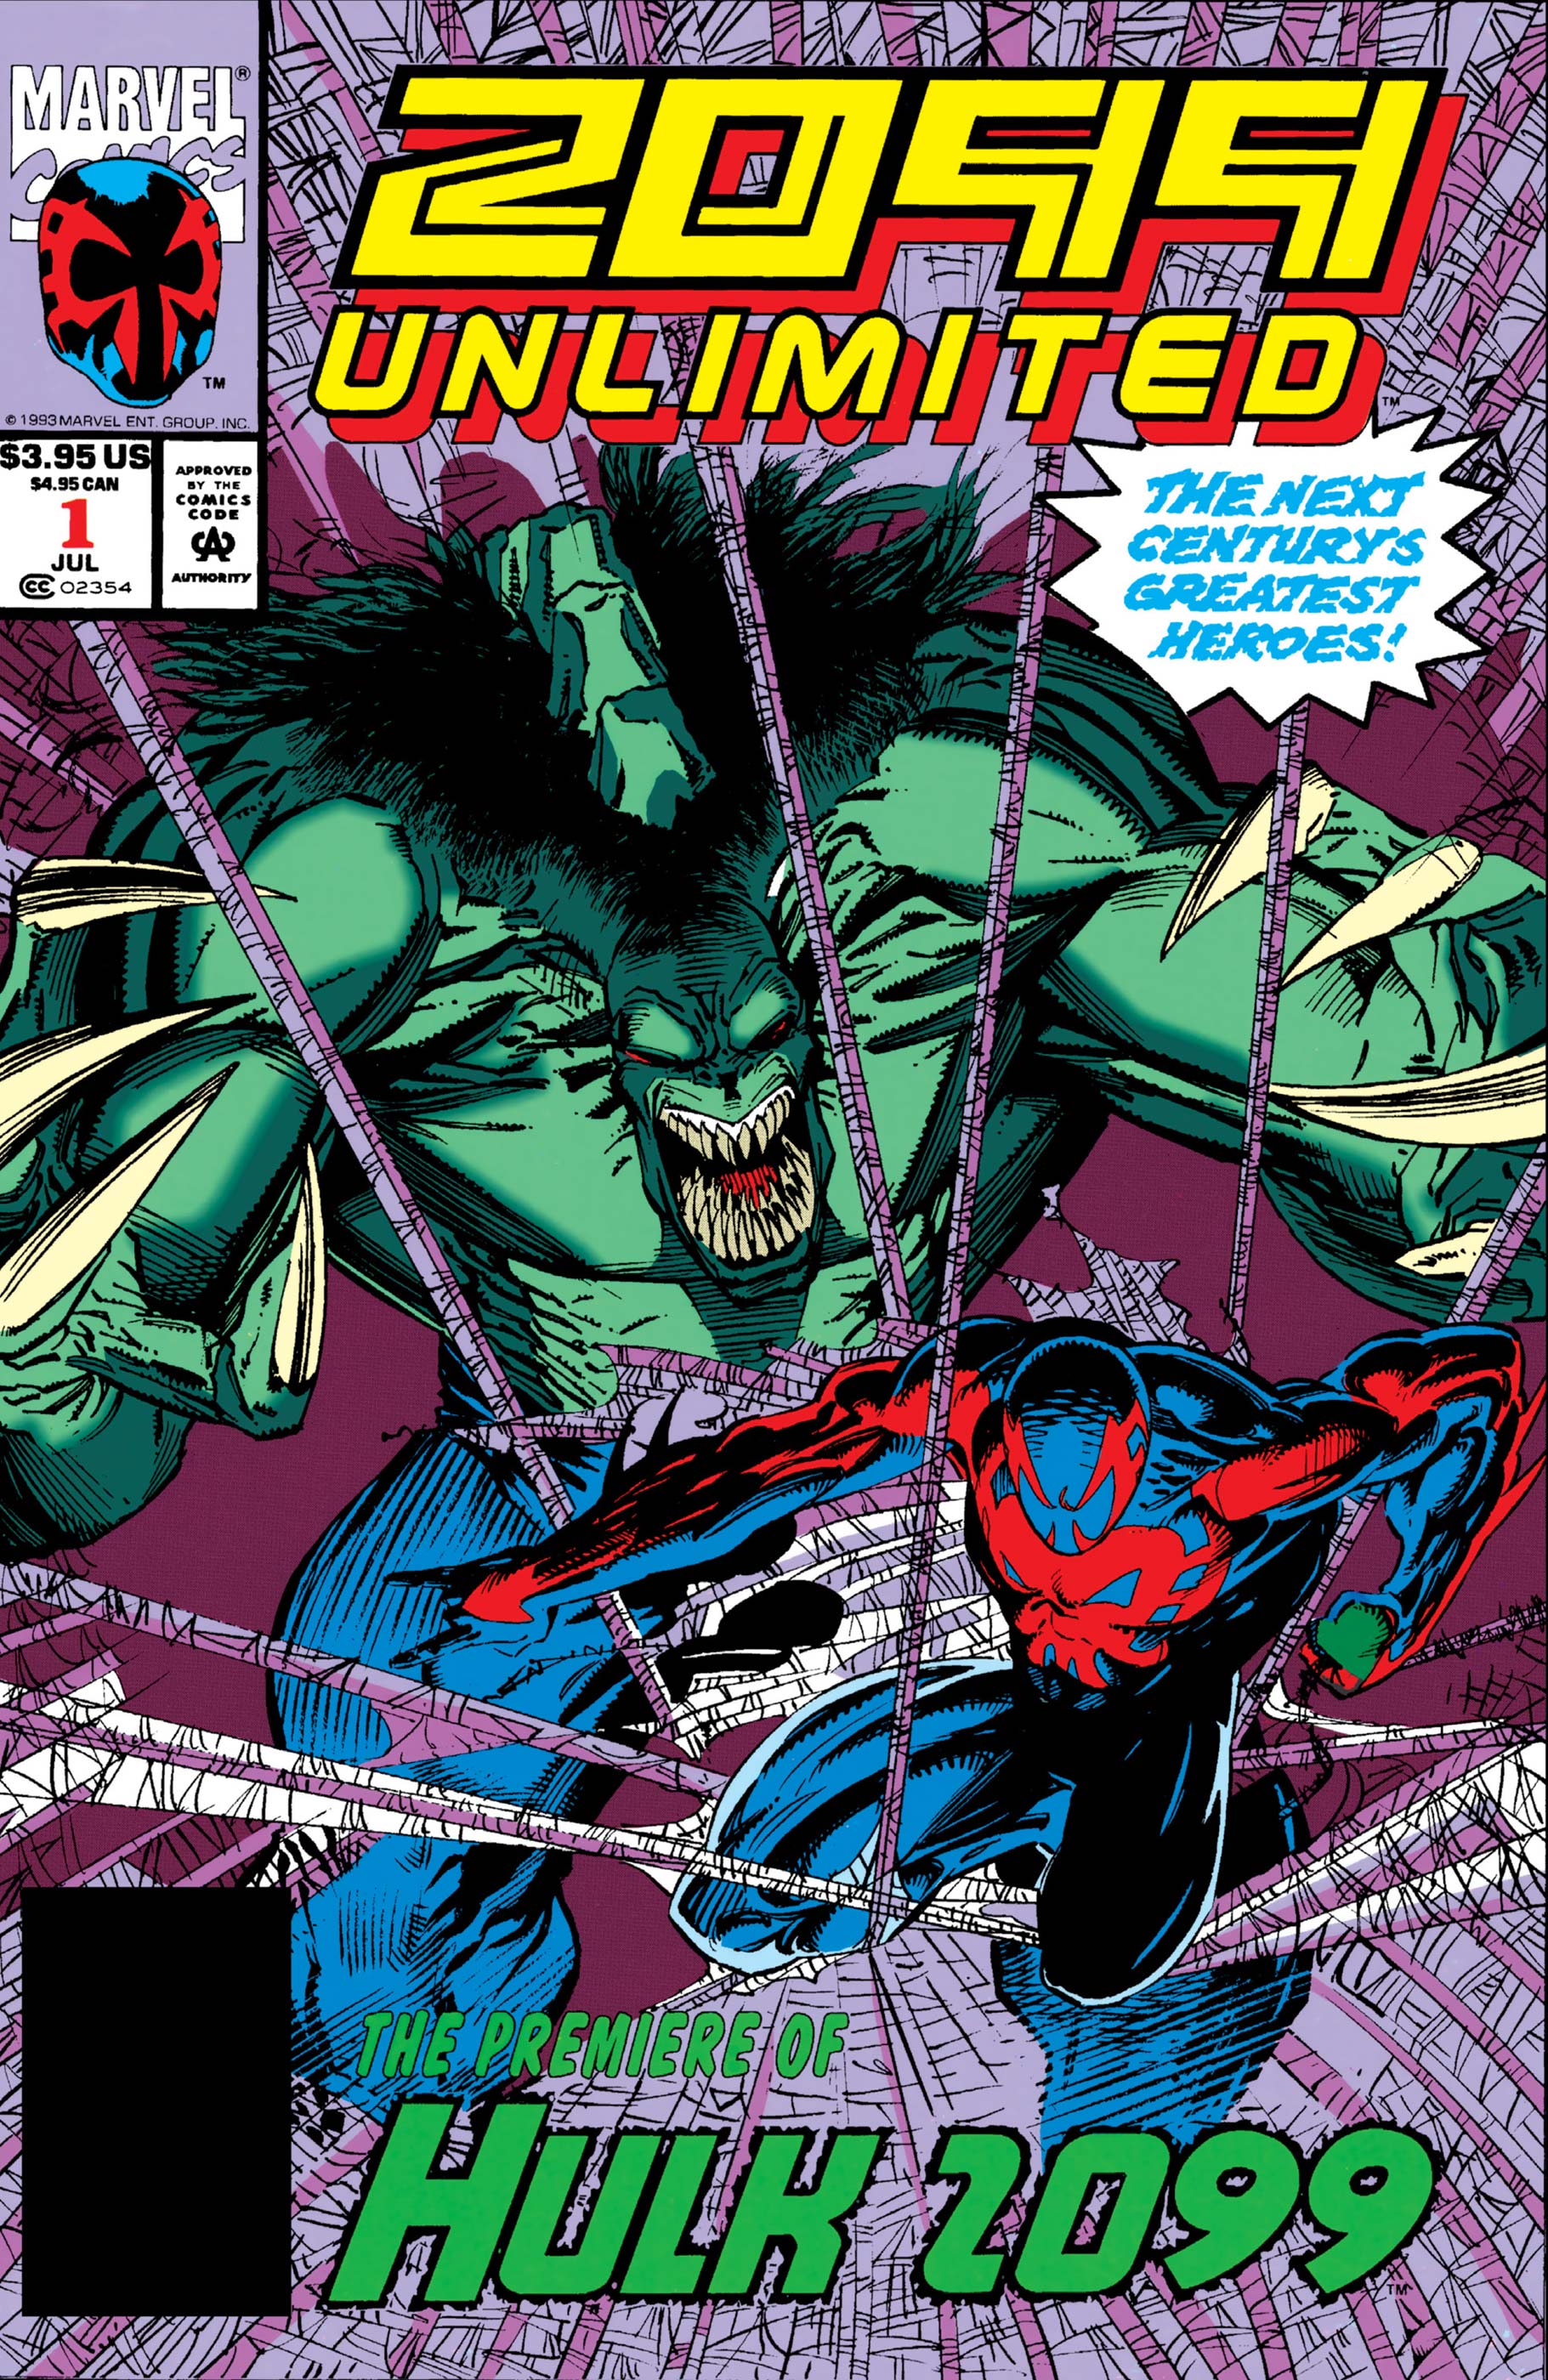 2099 Unlimited (1993) #1